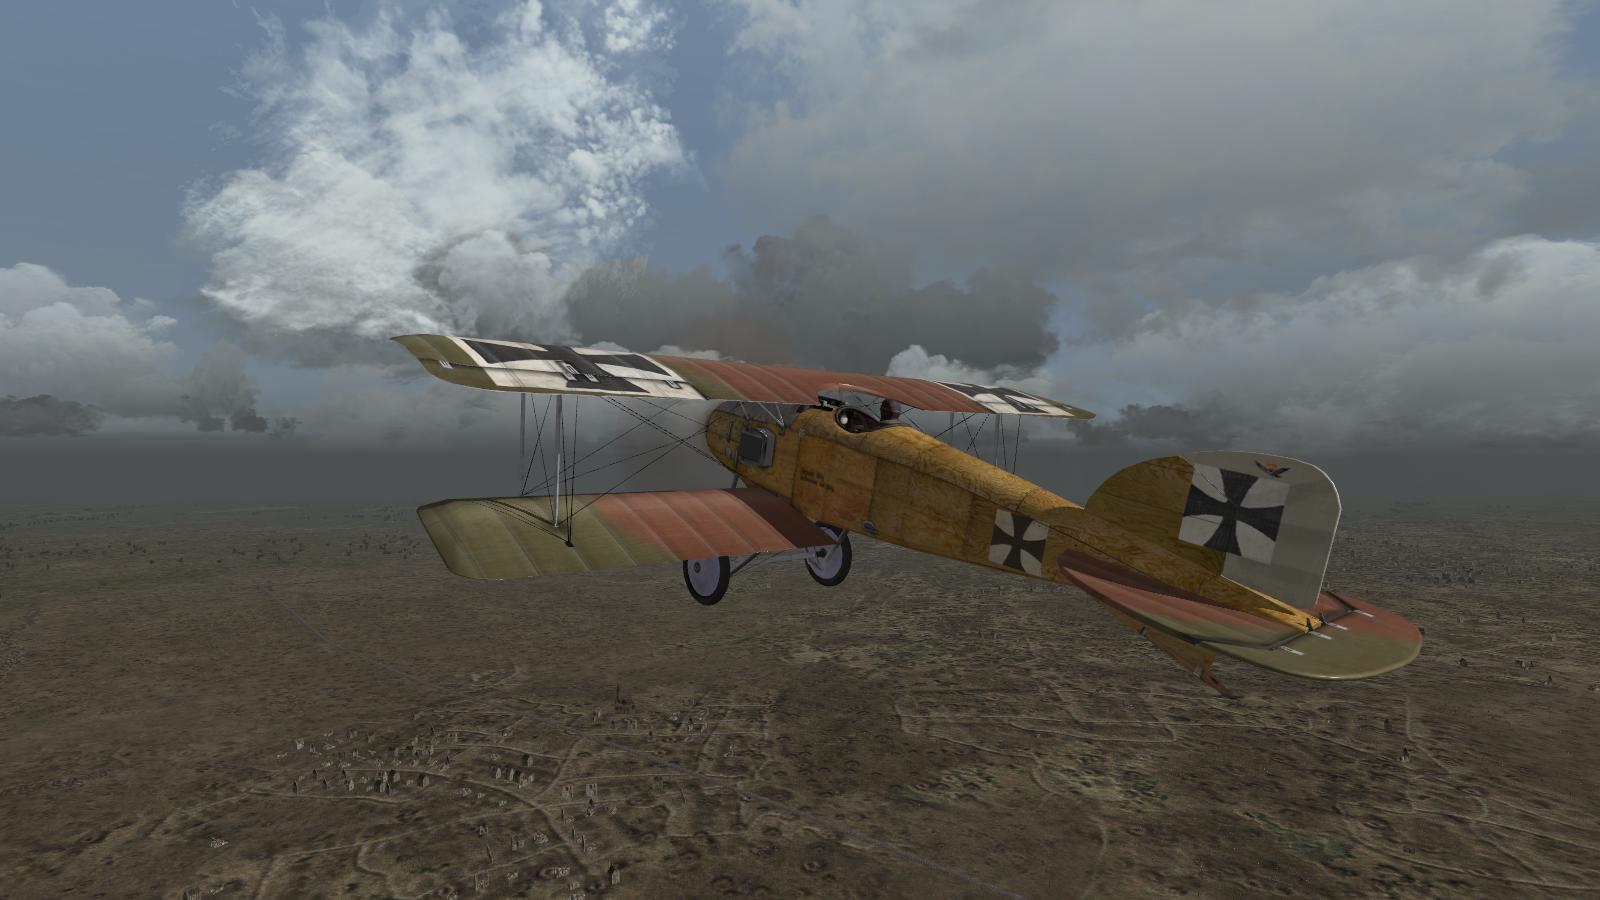 Wings over Flanders Fields - a Jasta 2 Albatros D.II over a ruined town at the lines, October 1916